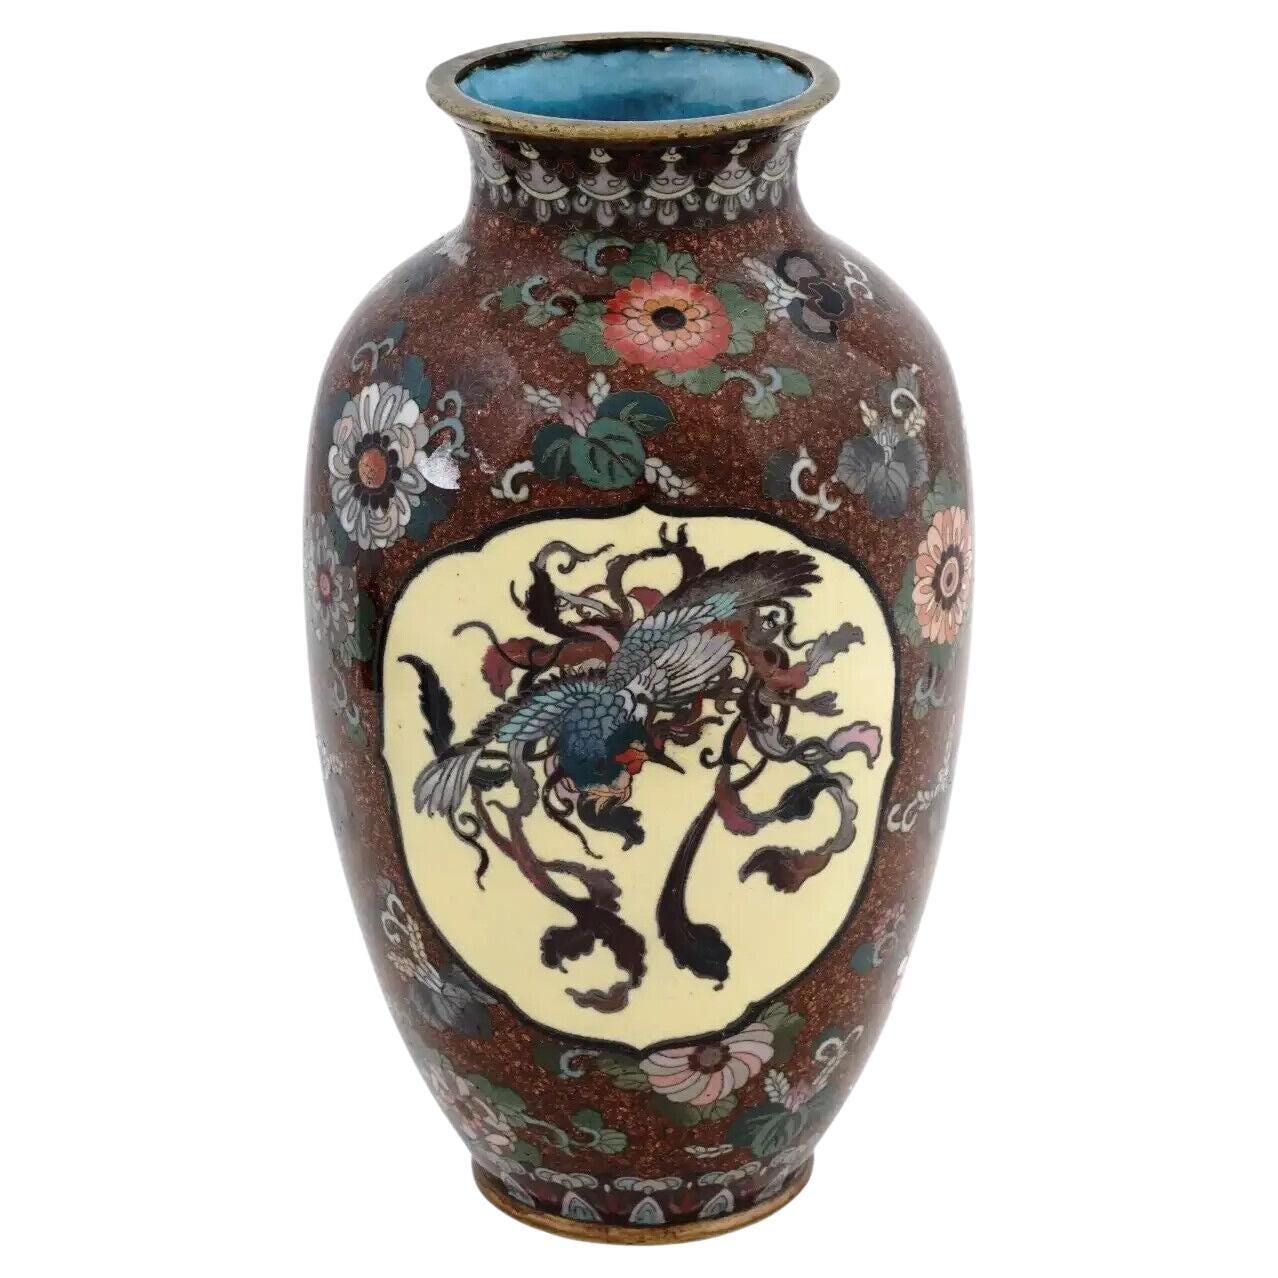 A large antique Japanese Meiji era enamel over brass vase. The amphora shaped vase is enameled with polychrome medallions with a Phoenix bird and a dragon surrounded by floral, and foliage motifs made in the Cloisonne technique. The neck and the